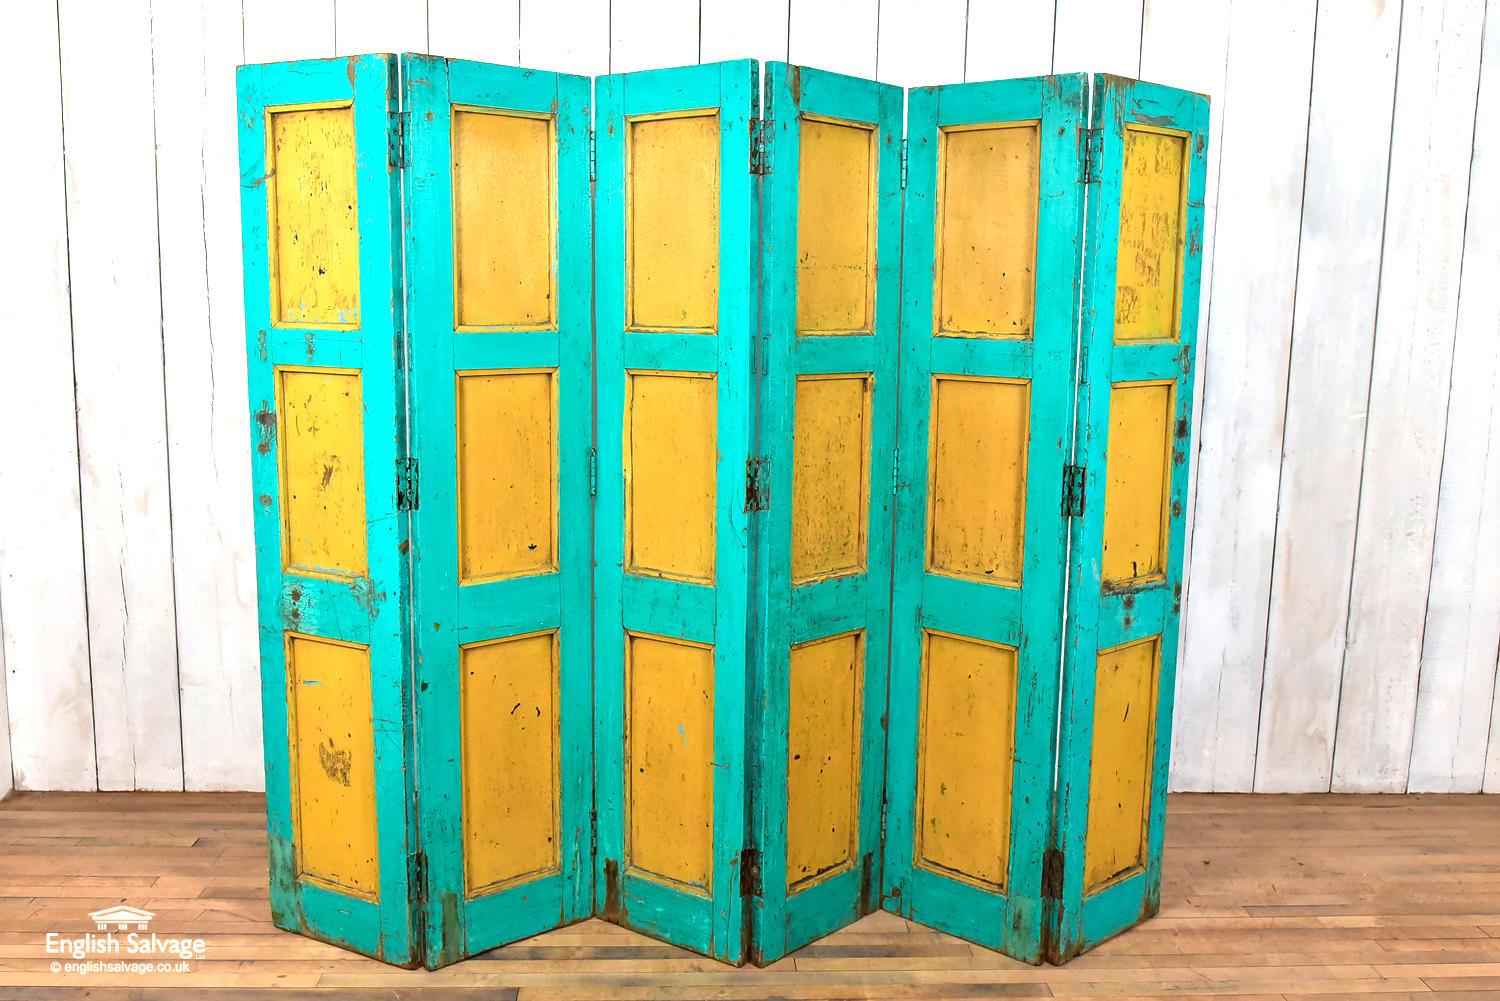 Reclaimed wood panelling in a vibrant teal and yellow color. The reverse is solid turquoise in color. The paint has a weathered patina with some age-related wear and scrapes. The screen is made up of six individual hinged panels (each with a width